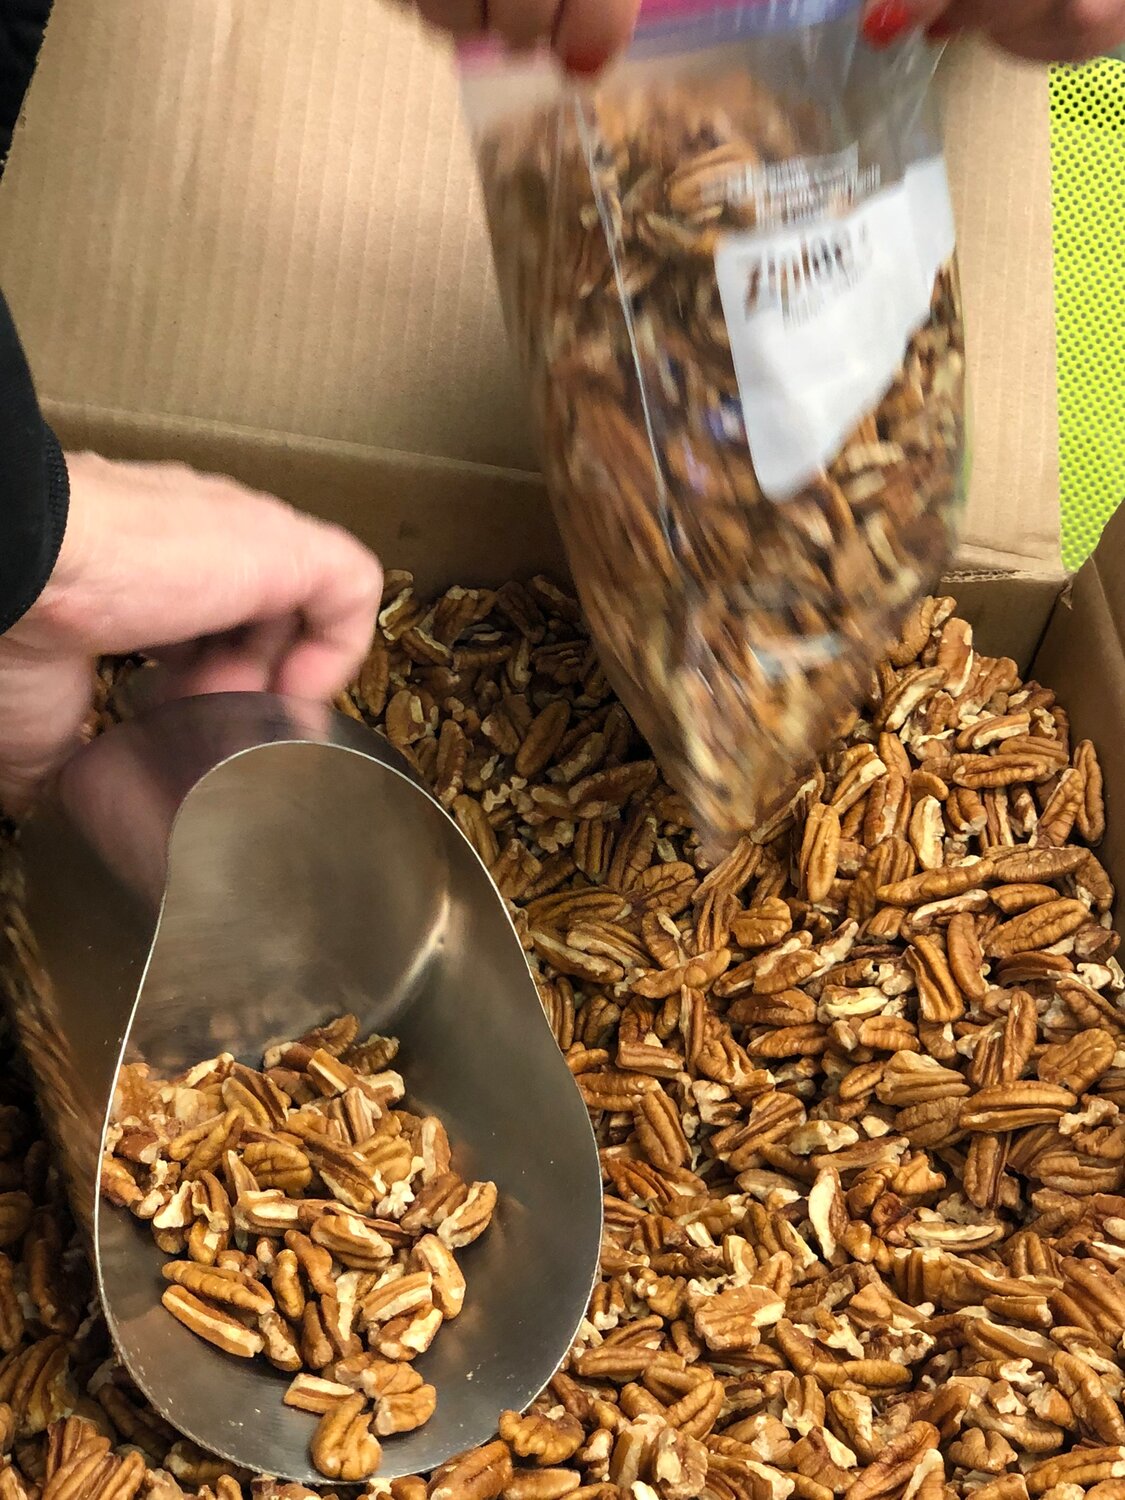 Locally grown pecans and area growers to be focus of upcoming Las Cruces Pecan Festival in April.